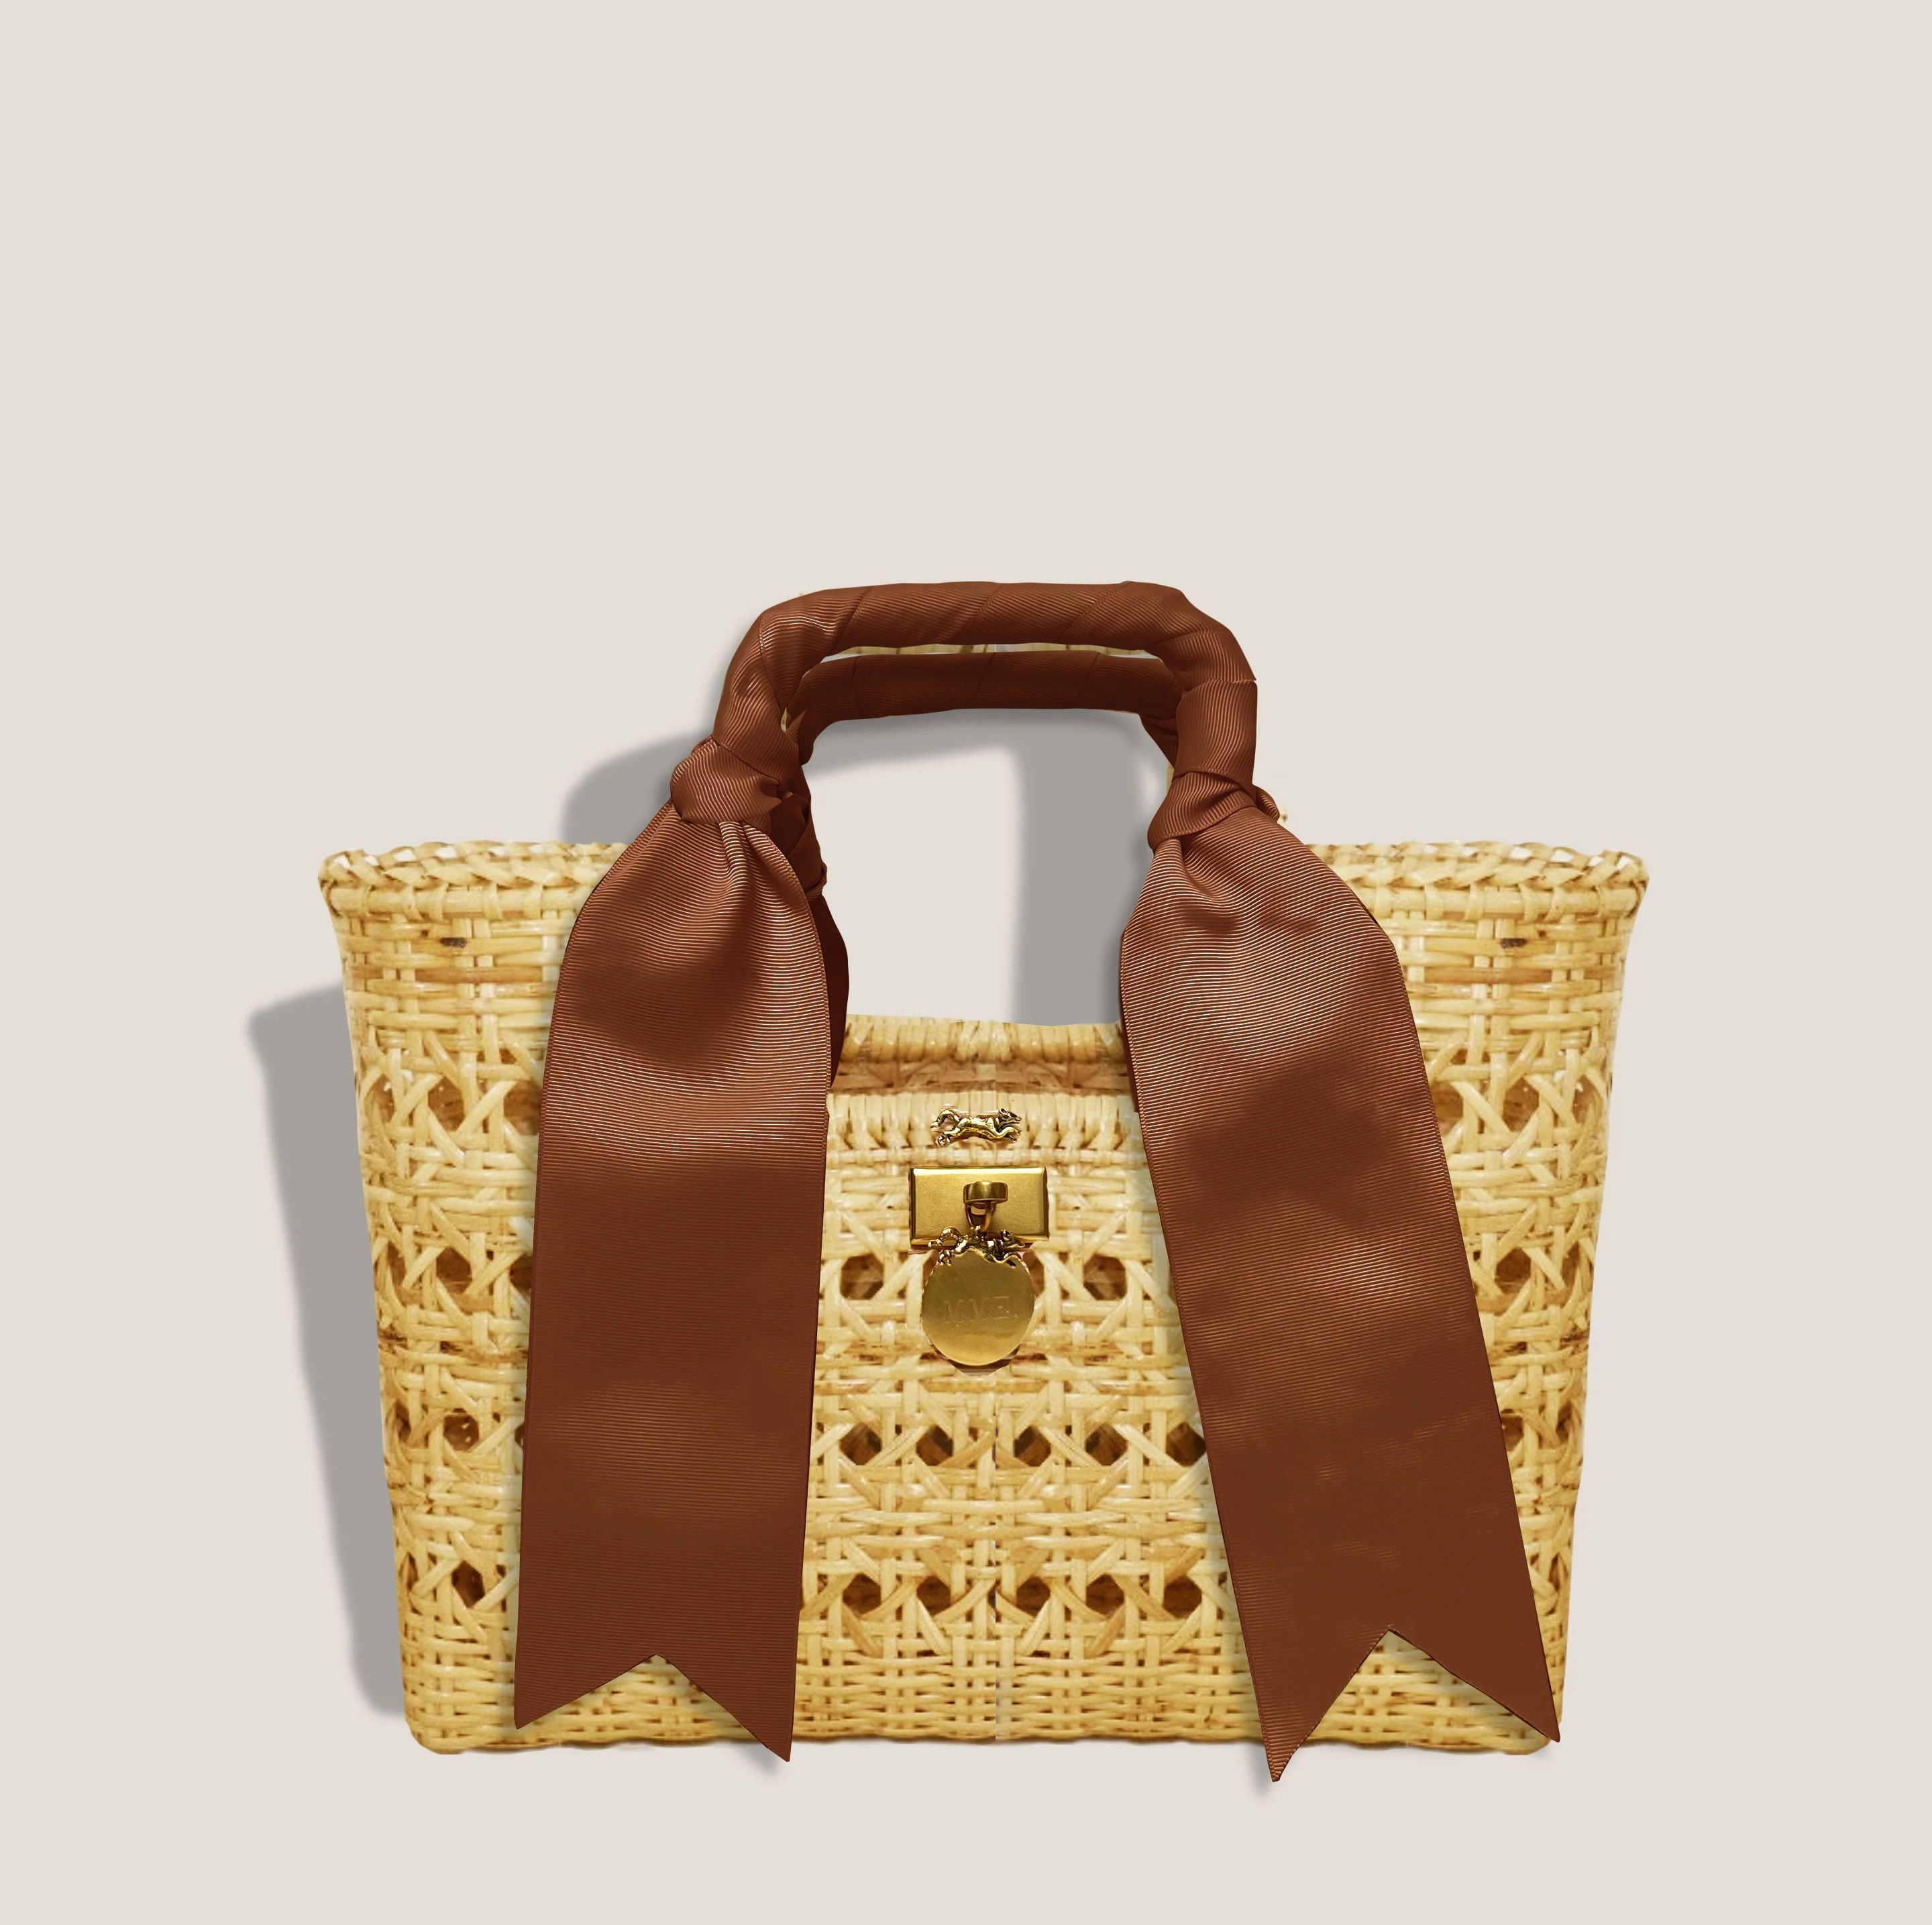 MME. VALENCE TOTE - COGNAC | MME.MINK